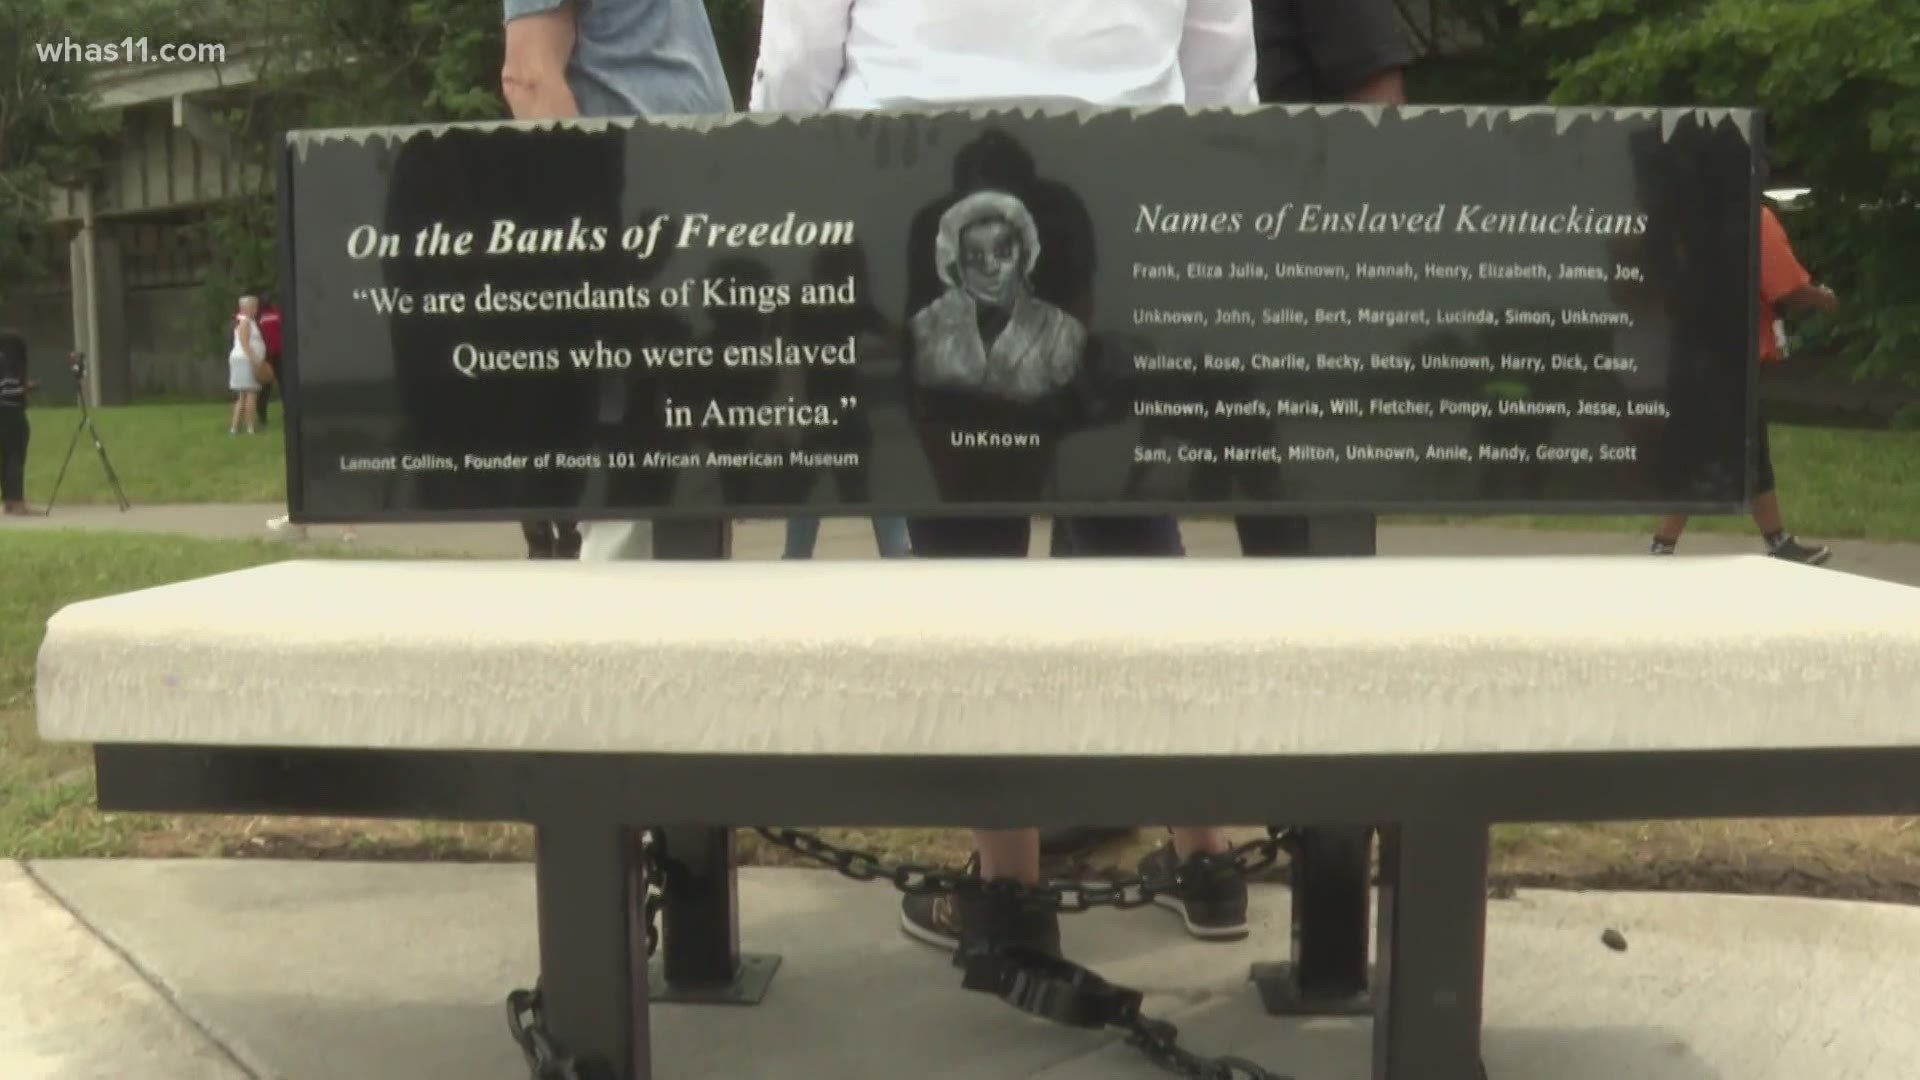 The On the Banks of Freedom monument honors Kentucky's forgotten slaves near downtown Louisville.